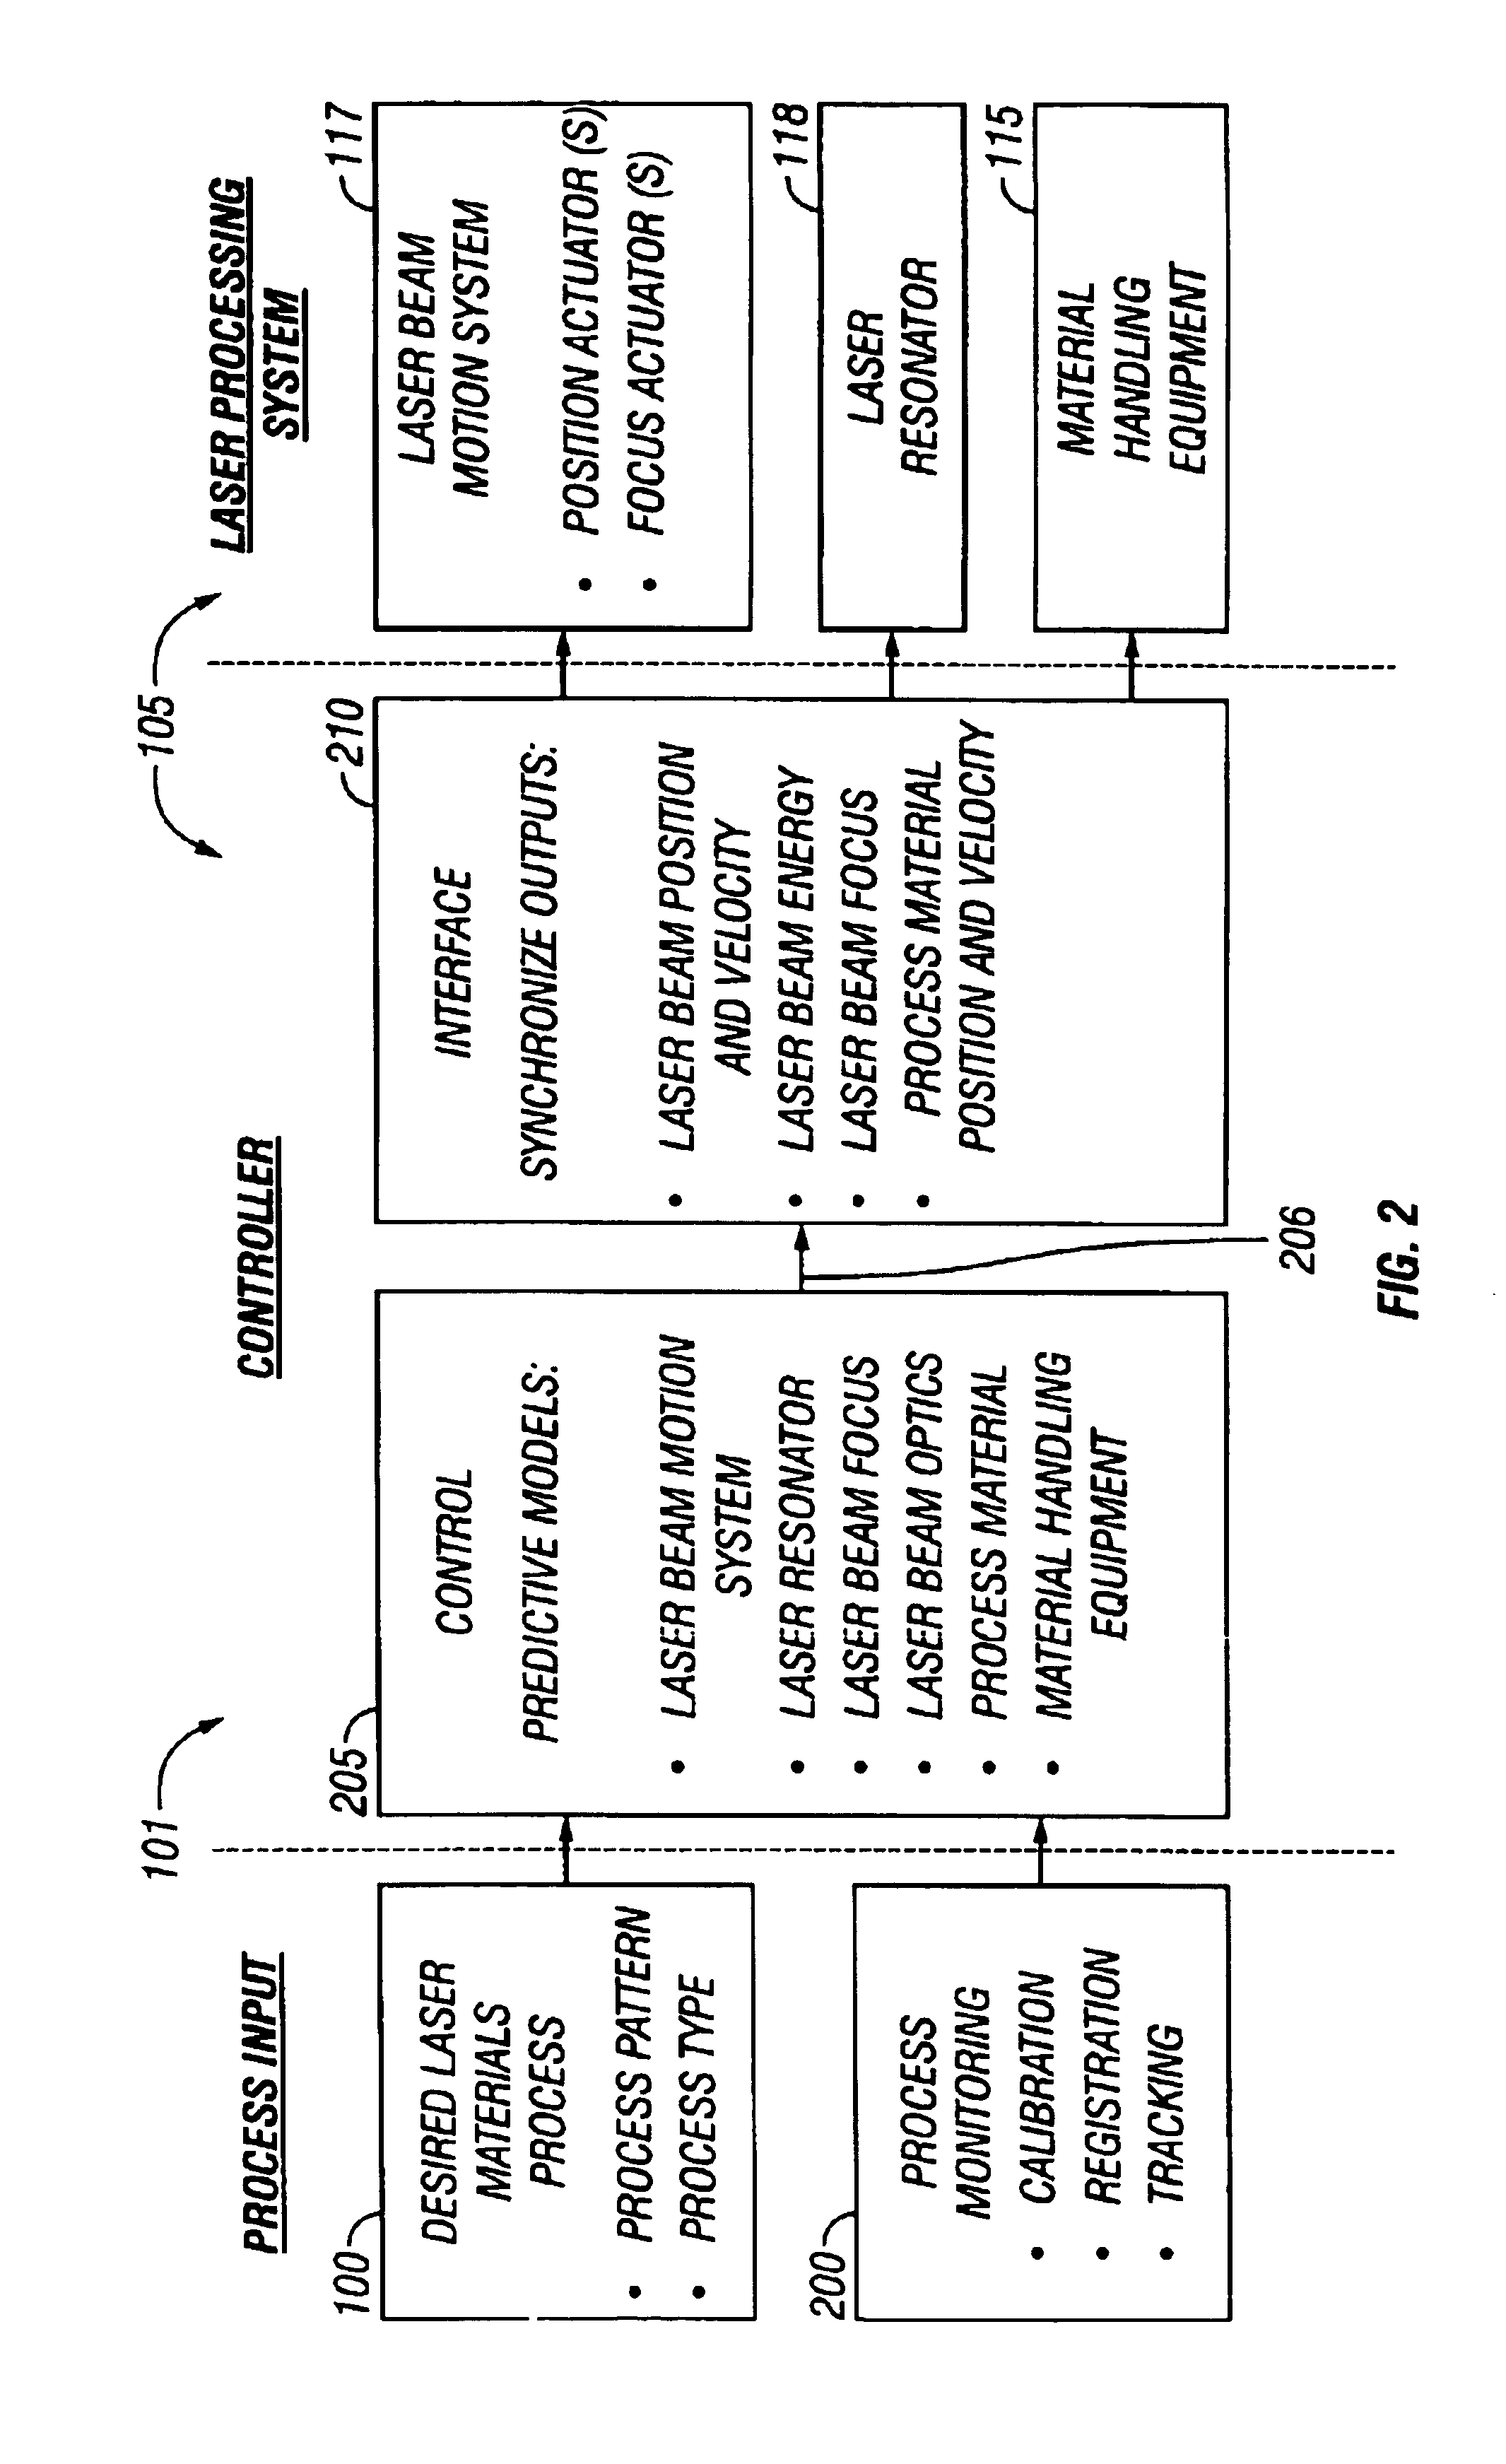 Controller for a laser using predictive models of materials processing